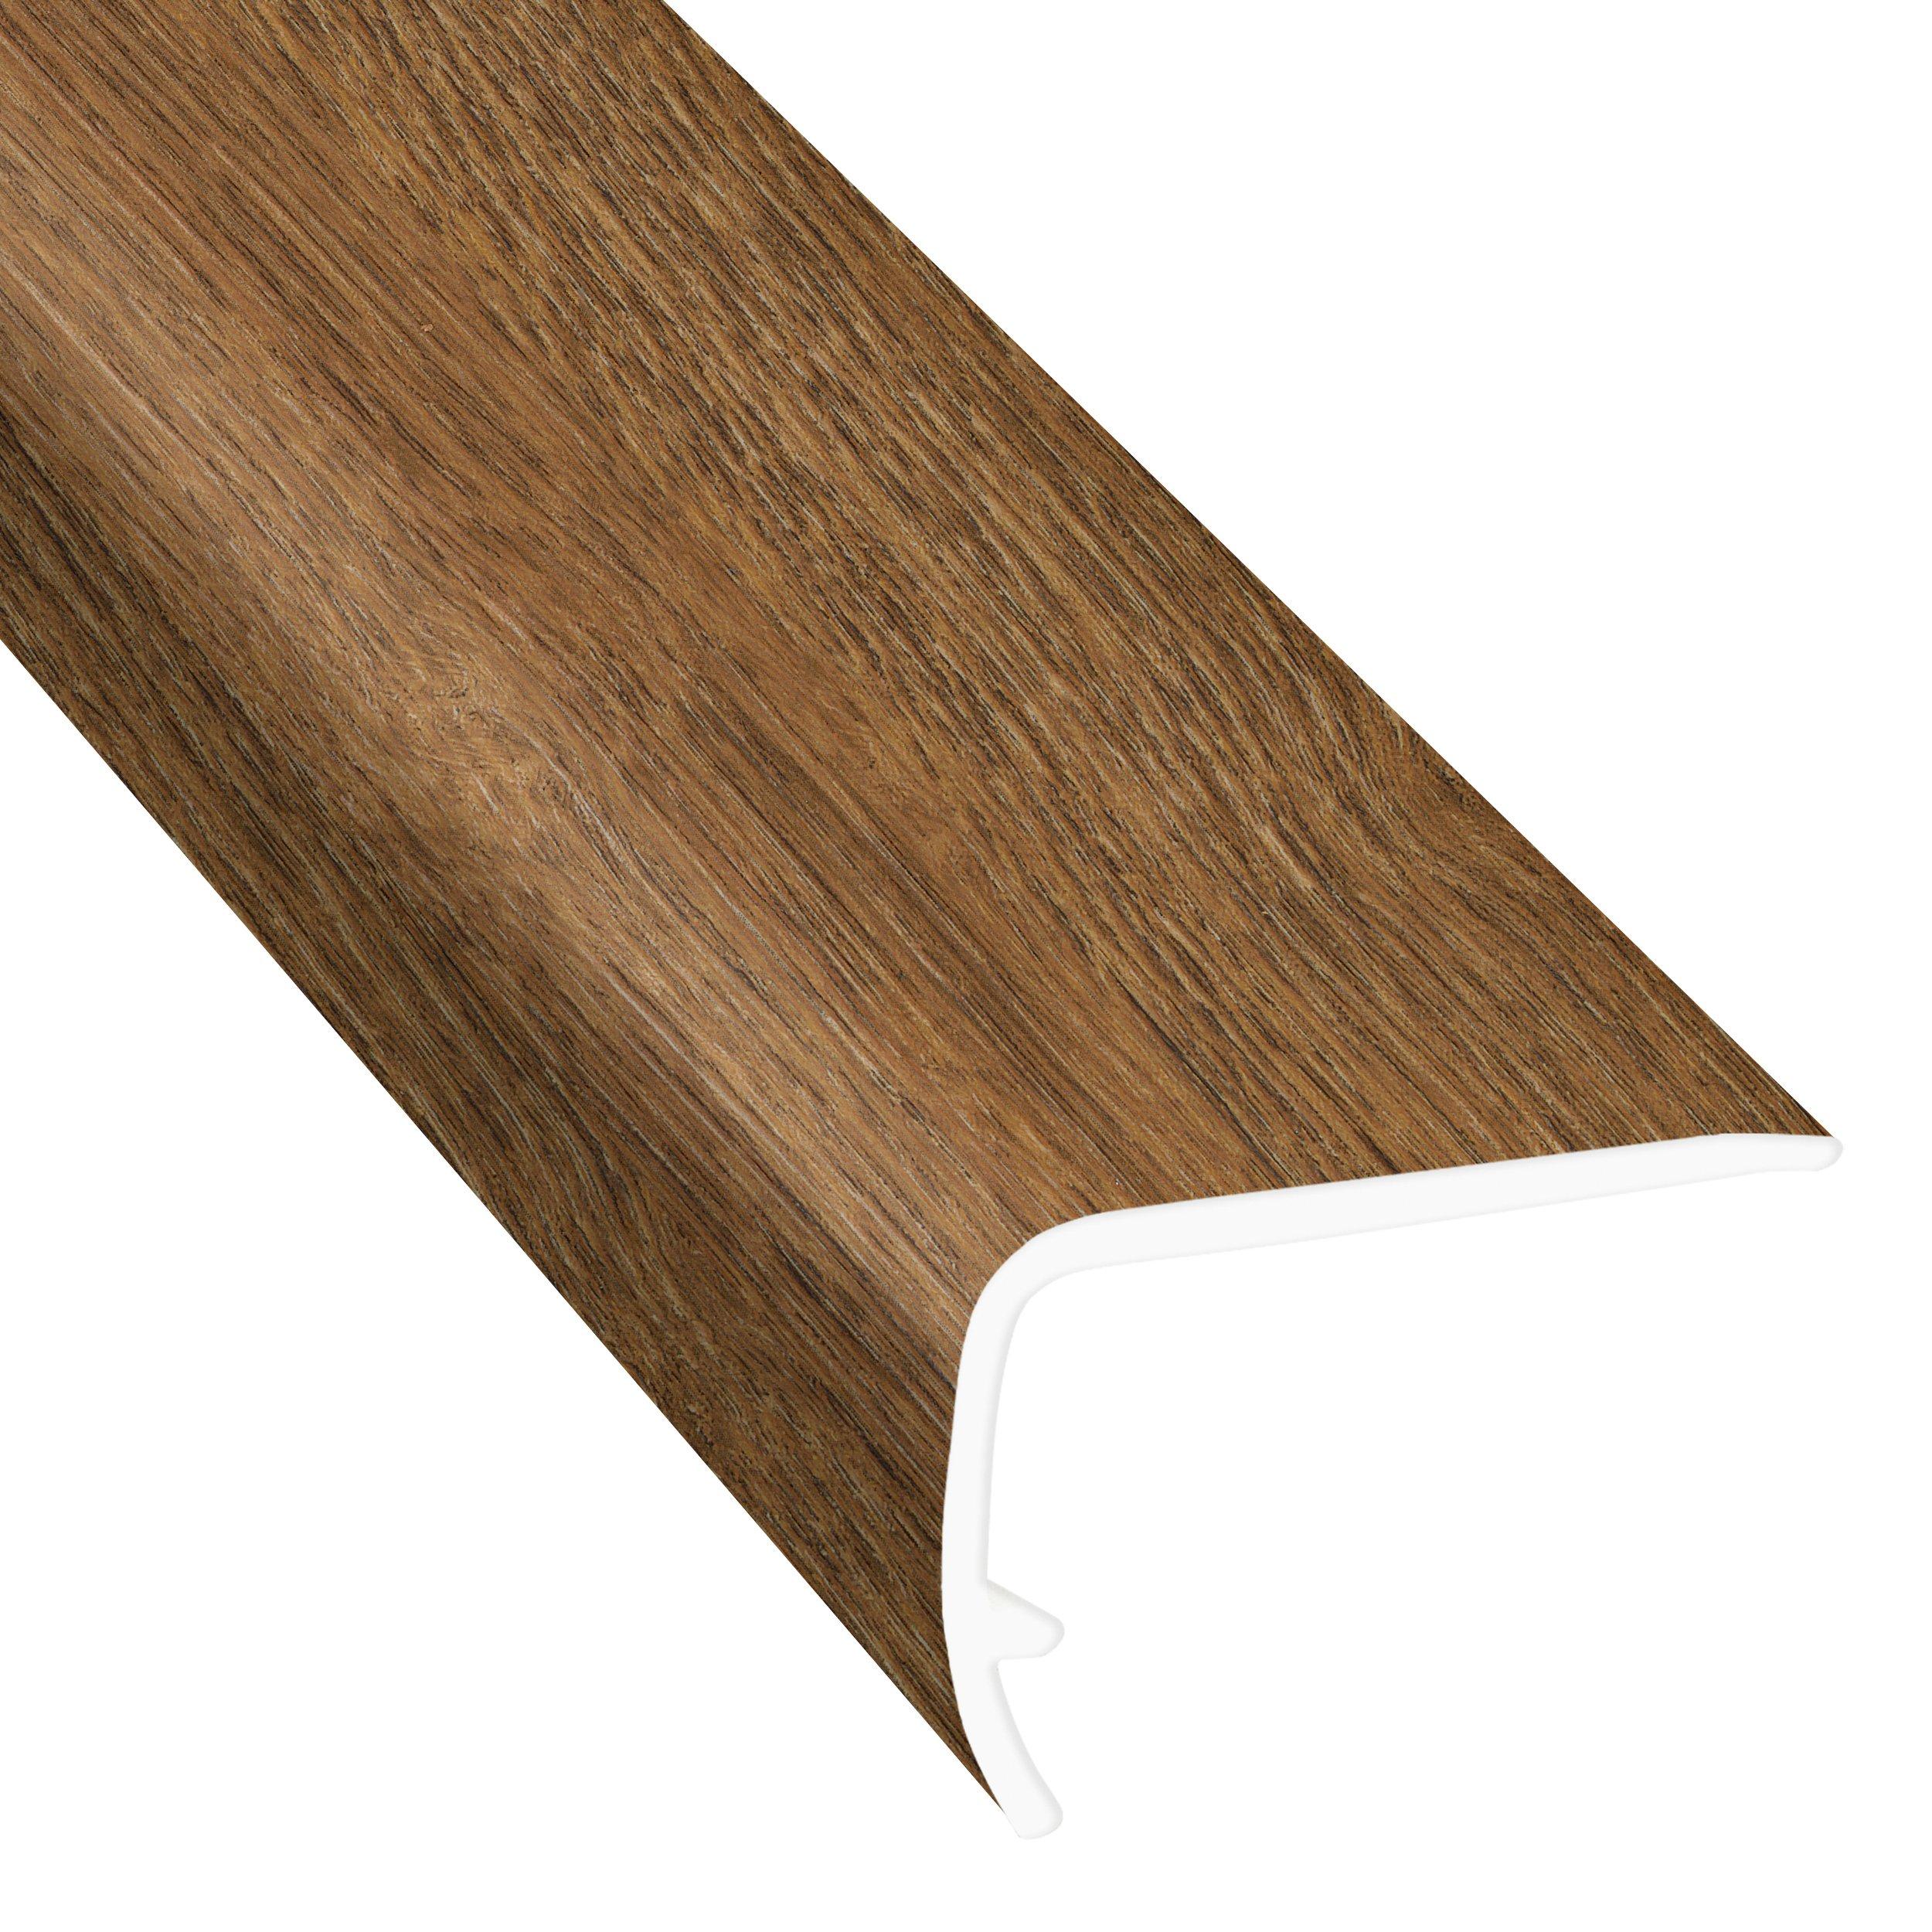 Spiced Oak 8WL 94in. Vinyl Overlapping Stair Nose